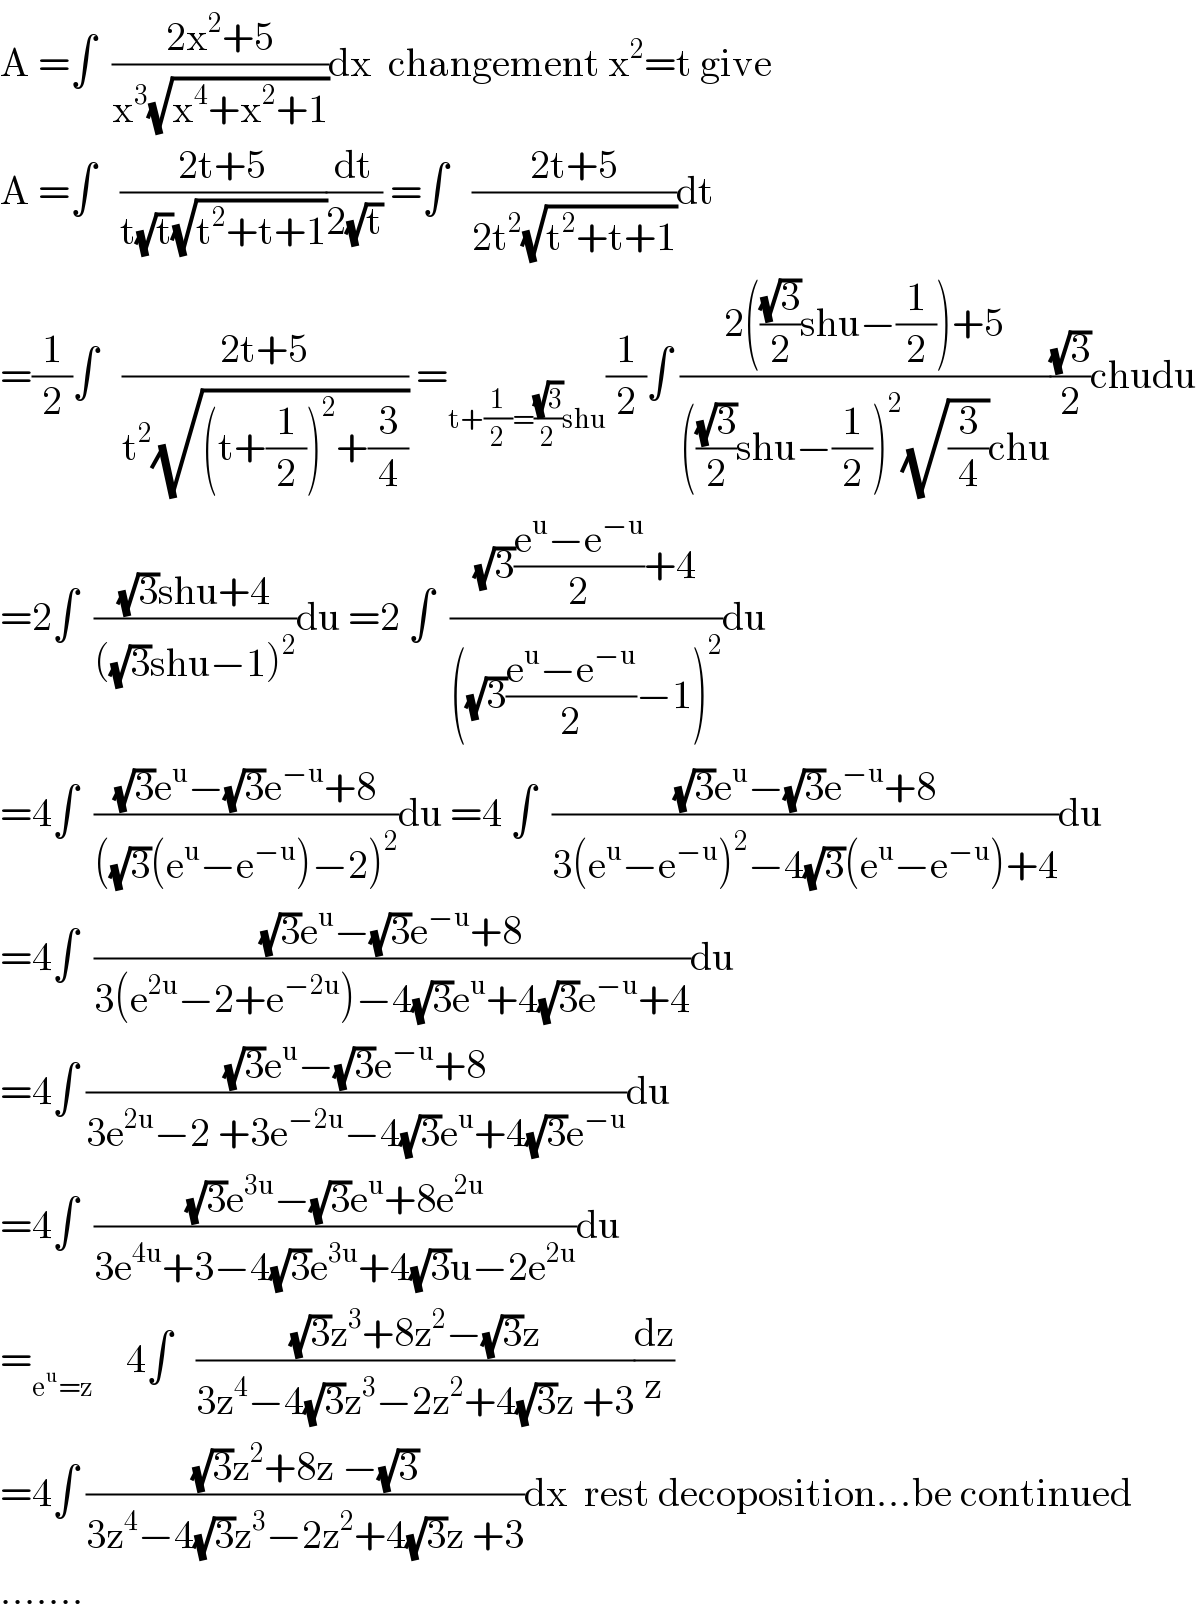 A =∫  ((2x^2 +5)/(x^3 (√(x^4 +x^2 +1))))dx  changement x^2 =t give  A =∫   ((2t+5)/(t(√t)(√(t^2 +t+1))))(dt/(2(√t))) =∫   ((2t+5)/(2t^2 (√(t^2 +t+1))))dt  =(1/2)∫   ((2t+5)/(t^2 (√((t+(1/2))^2 +(3/4))))) =_(t+(1/2)=((√3)/2)shu) (1/2)∫ ((2(((√3)/2)shu−(1/2))+5)/((((√3)/2)shu−(1/2))^2 (√(3/4))chu))((√3)/2)chudu  =2∫  (((√3)shu+4)/(((√3)shu−1)^2 ))du =2 ∫  (((√3)((e^u −e^(−u) )/2)+4)/(((√3)((e^u −e^(−u) )/2)−1)^2 ))du  =4∫  (((√3)e^u −(√3)e^(−u) +8)/(((√3)(e^u −e^(−u) )−2)^2 ))du =4 ∫  (((√3)e^u −(√3)e^(−u) +8)/(3(e^u −e^(−u) )^2 −4(√3)(e^u −e^(−u) )+4))du  =4∫  (((√3)e^u −(√3)e^(−u) +8)/(3(e^(2u) −2+e^(−2u) )−4(√3)e^u +4(√3)e^(−u) +4))du  =4∫ (((√3)e^u −(√3)e^(−u) +8)/(3e^(2u) −2 +3e^(−2u) −4(√3)e^u +4(√3)e^(−u) ))du  =4∫  (((√3)e^(3u) −(√3)e^u +8e^(2u) )/(3e^(4u) +3−4(√3)e^(3u) +4(√3)u−2e^(2u) ))du  =_(e^u =z)     4∫   (((√3)z^3 +8z^2 −(√3)z)/(3z^4 −4(√3)z^3 −2z^2 +4(√3)z +3))(dz/z)  =4∫ (((√3)z^2 +8z −(√3))/(3z^4 −4(√3)z^3 −2z^2 +4(√3)z +3))dx  rest decoposition...be continued  .......  